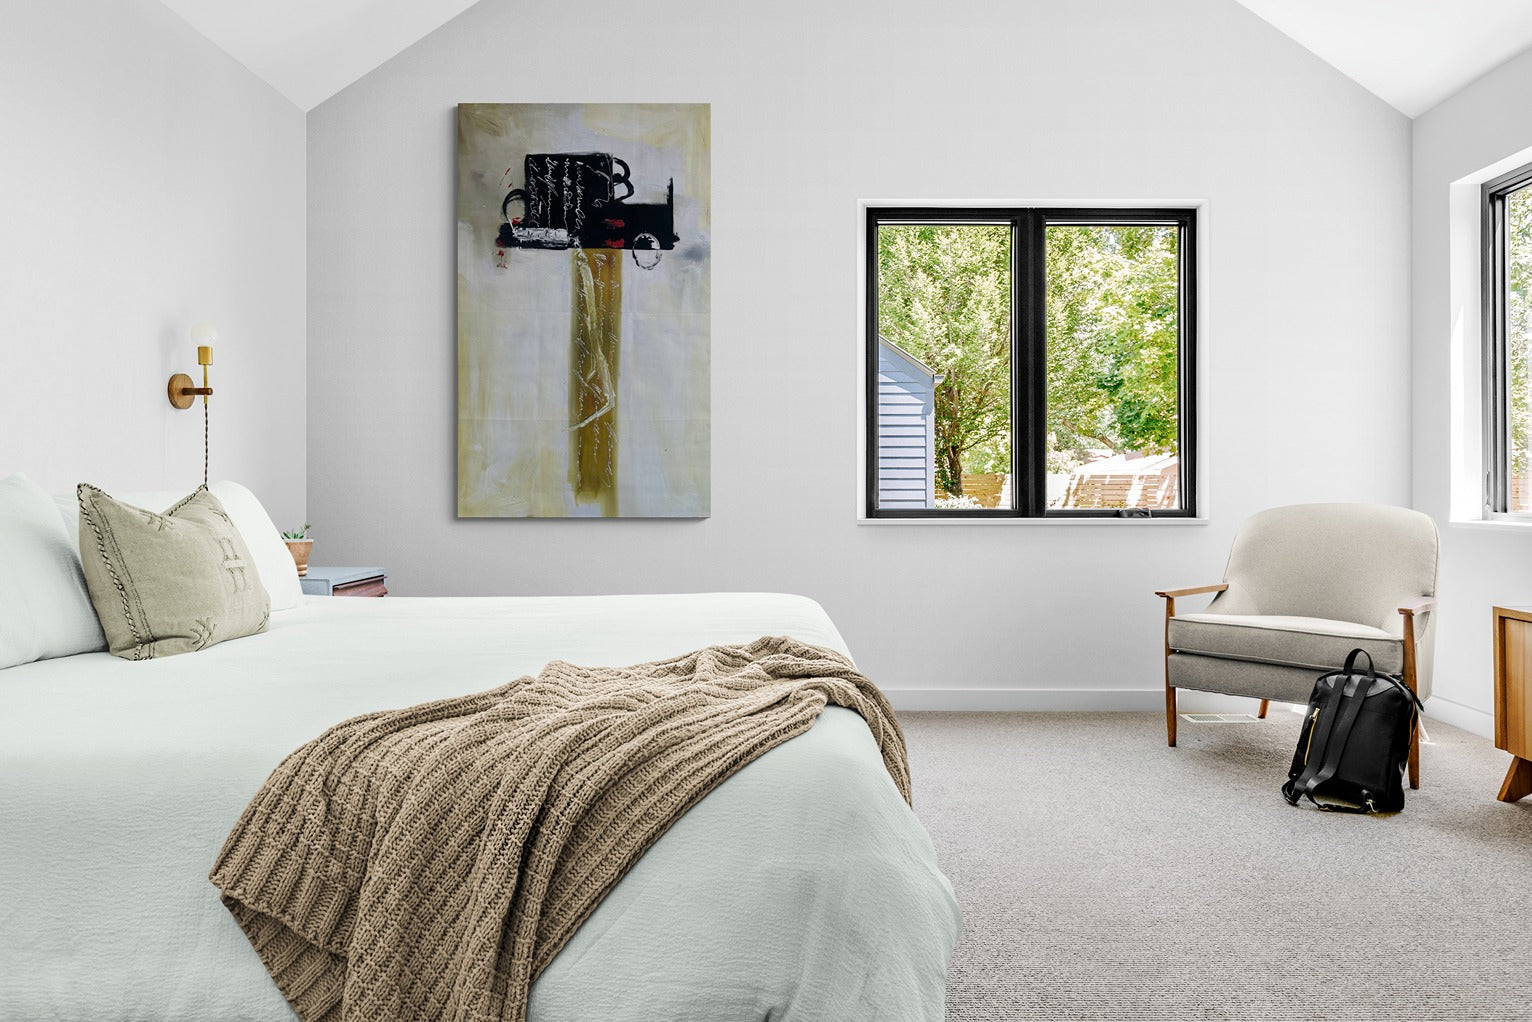 Large abstract original hand painted canvas wall art inside a confortable bedroom with a great garden view.